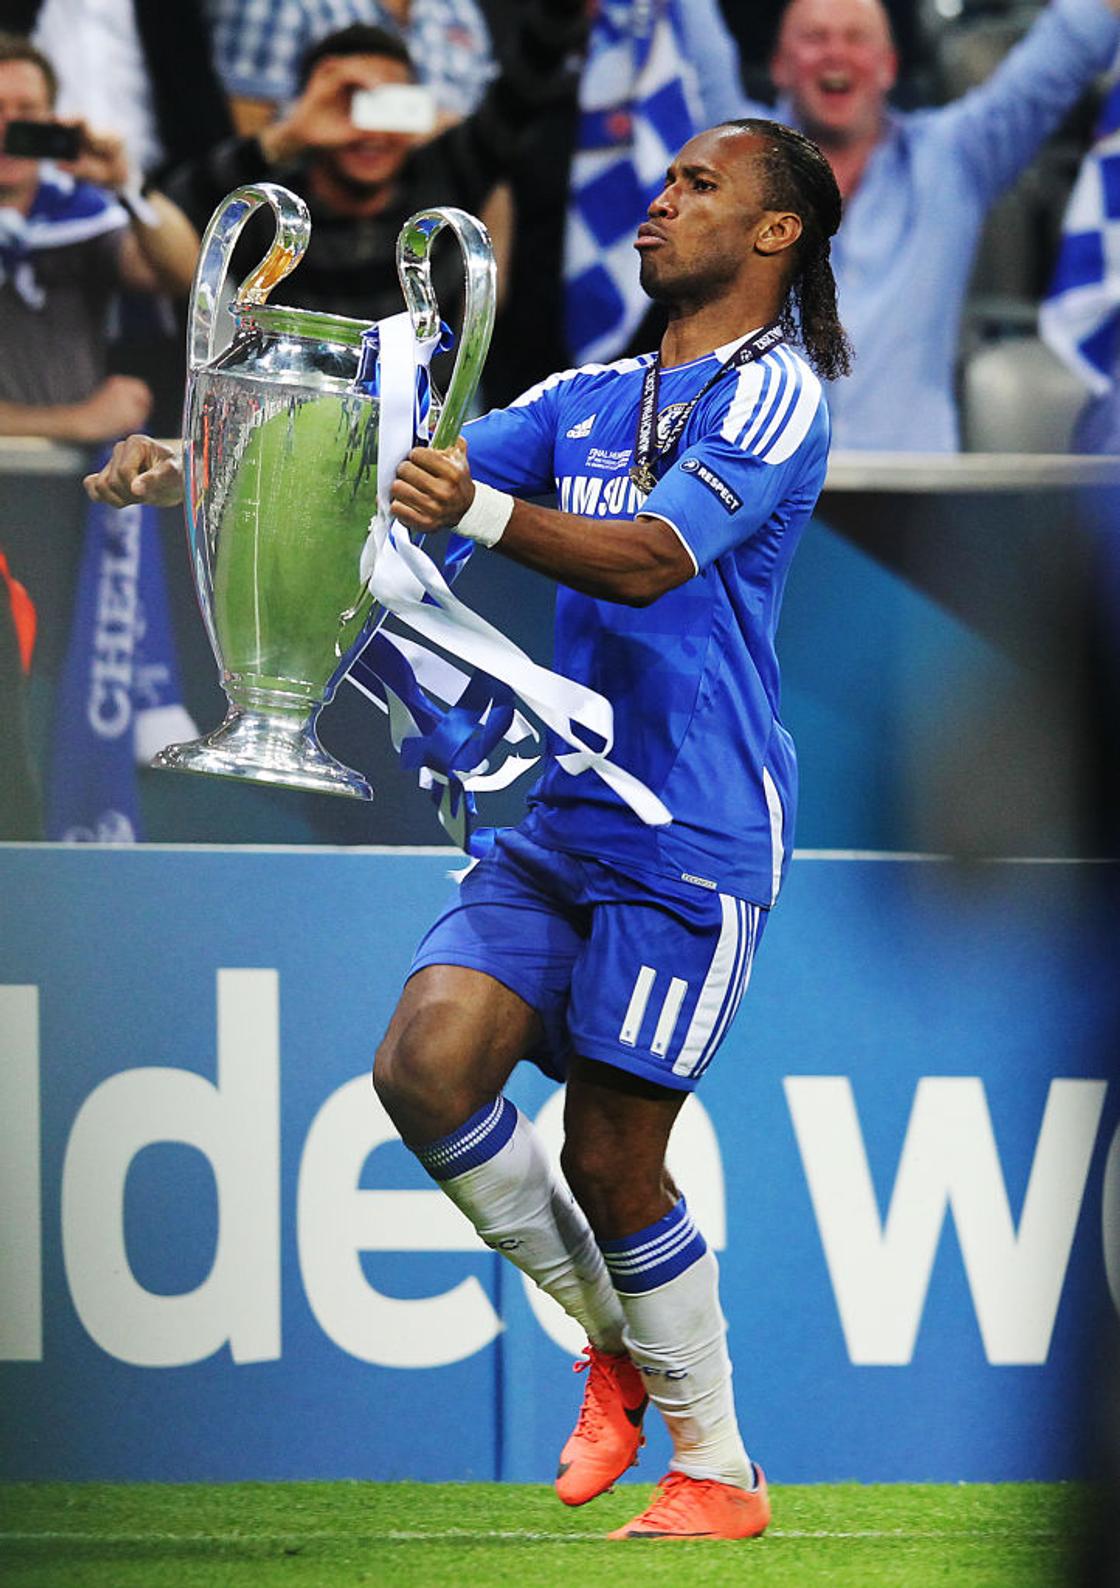 Didier Drogba with the UCL Trophy